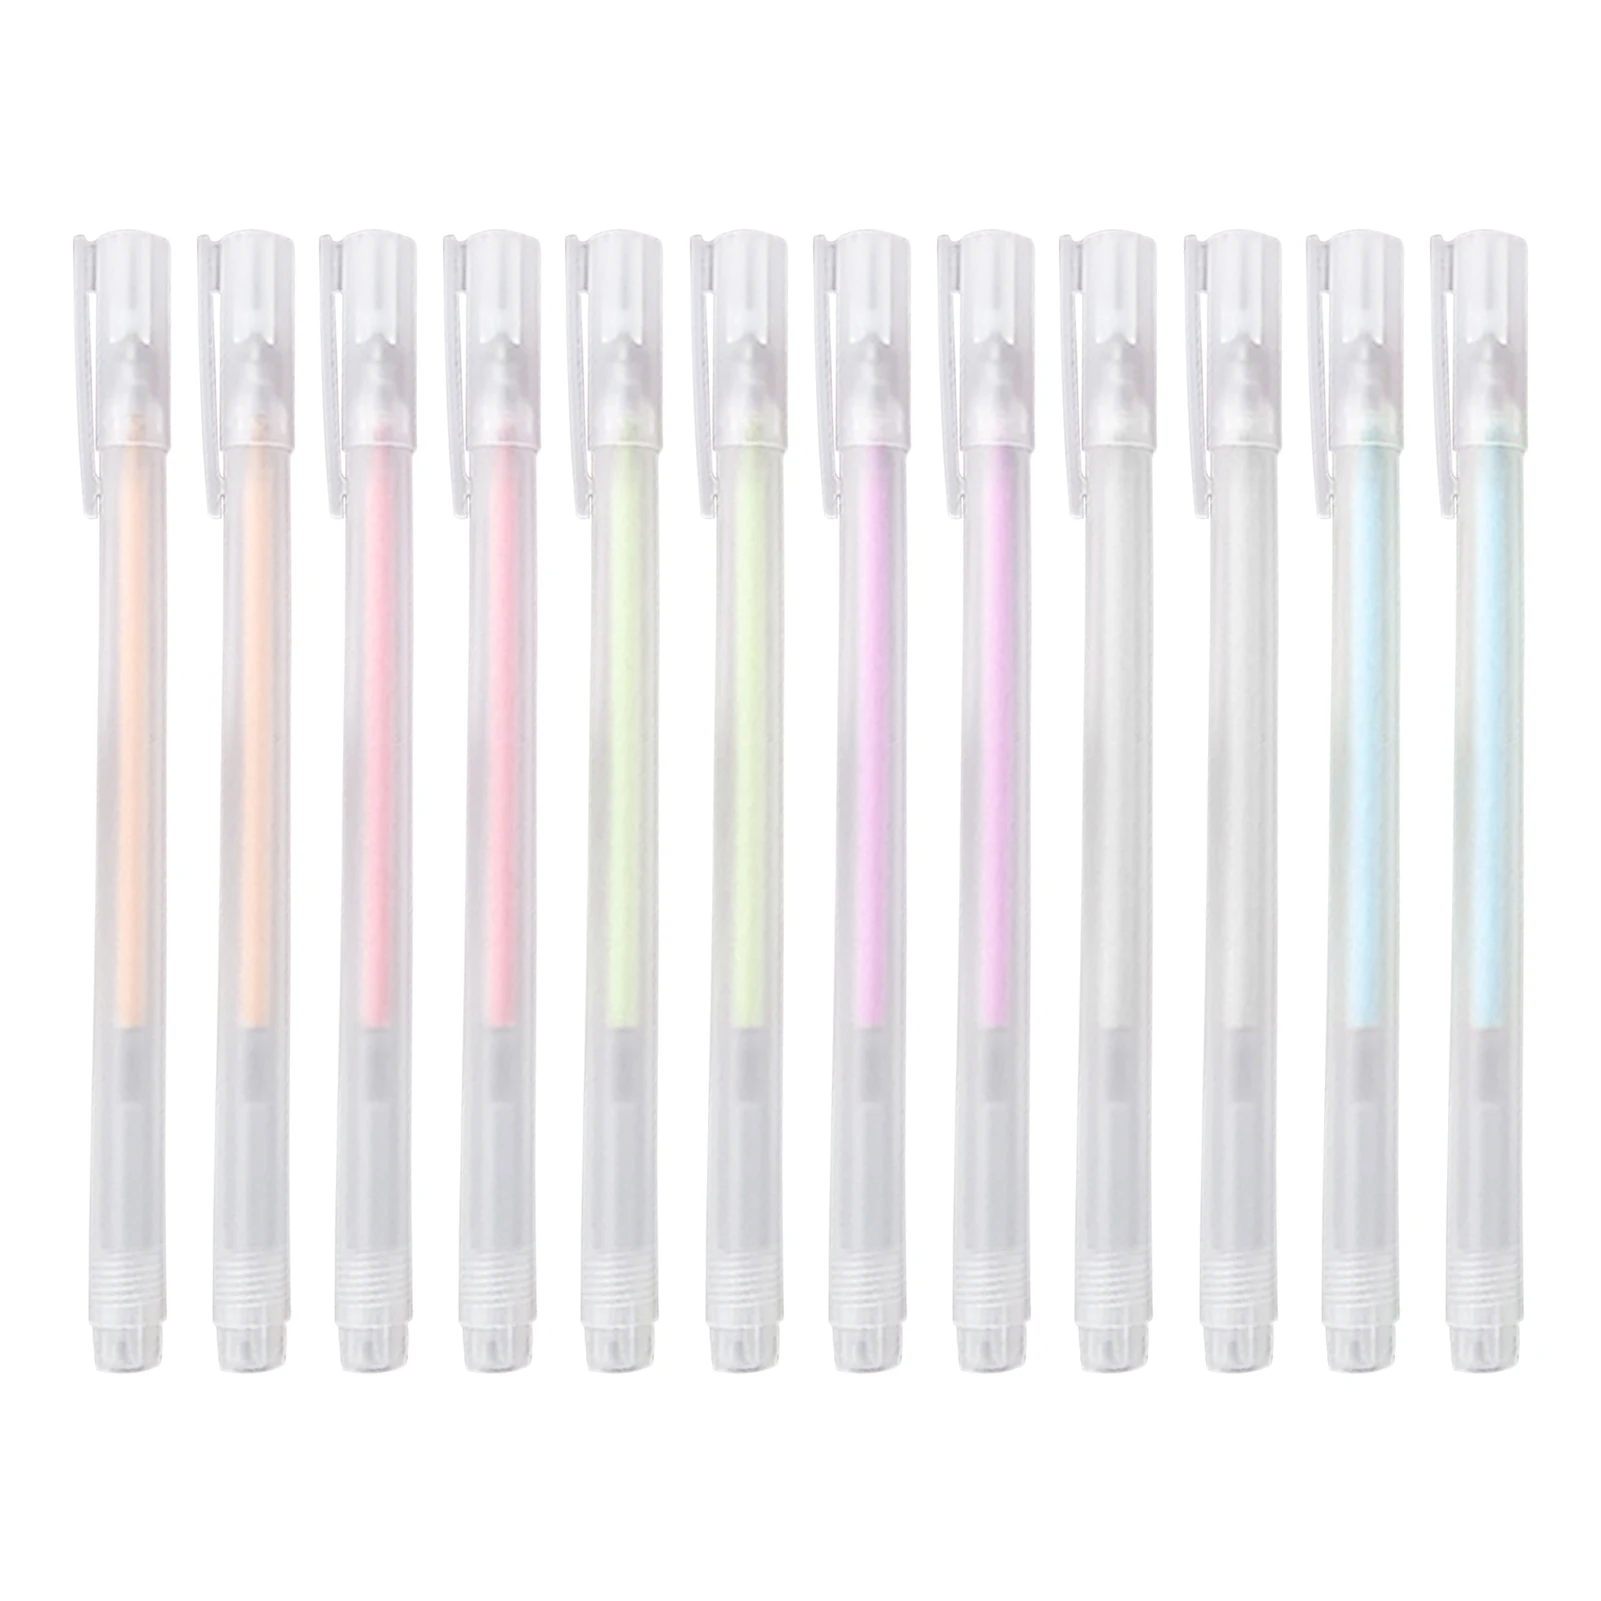 

12pcs Student Children Liquid Glue Sticks Fast Curing Strong Adhesive High Viscosity Accessories Plastic Art Pen Style Daily